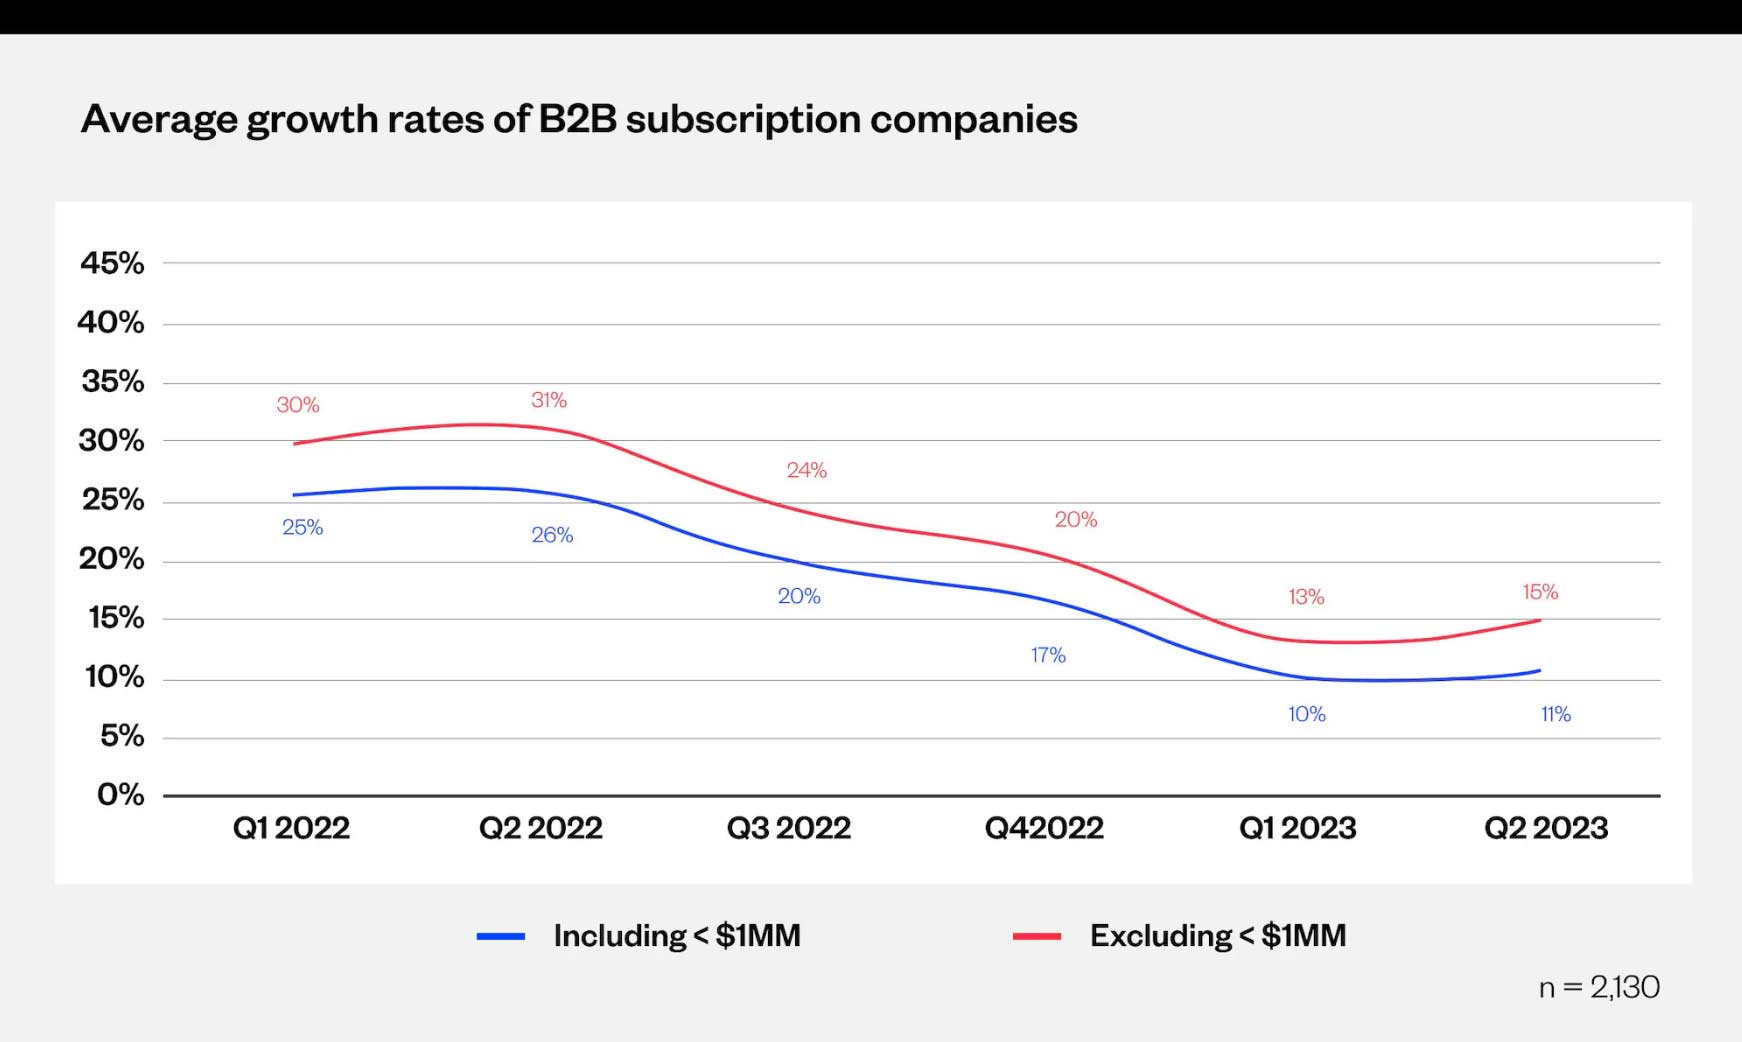 B2B SaaS Growth Rate slowed from thirty percent to fifteen percent between Q1 2022 and Q2 2023